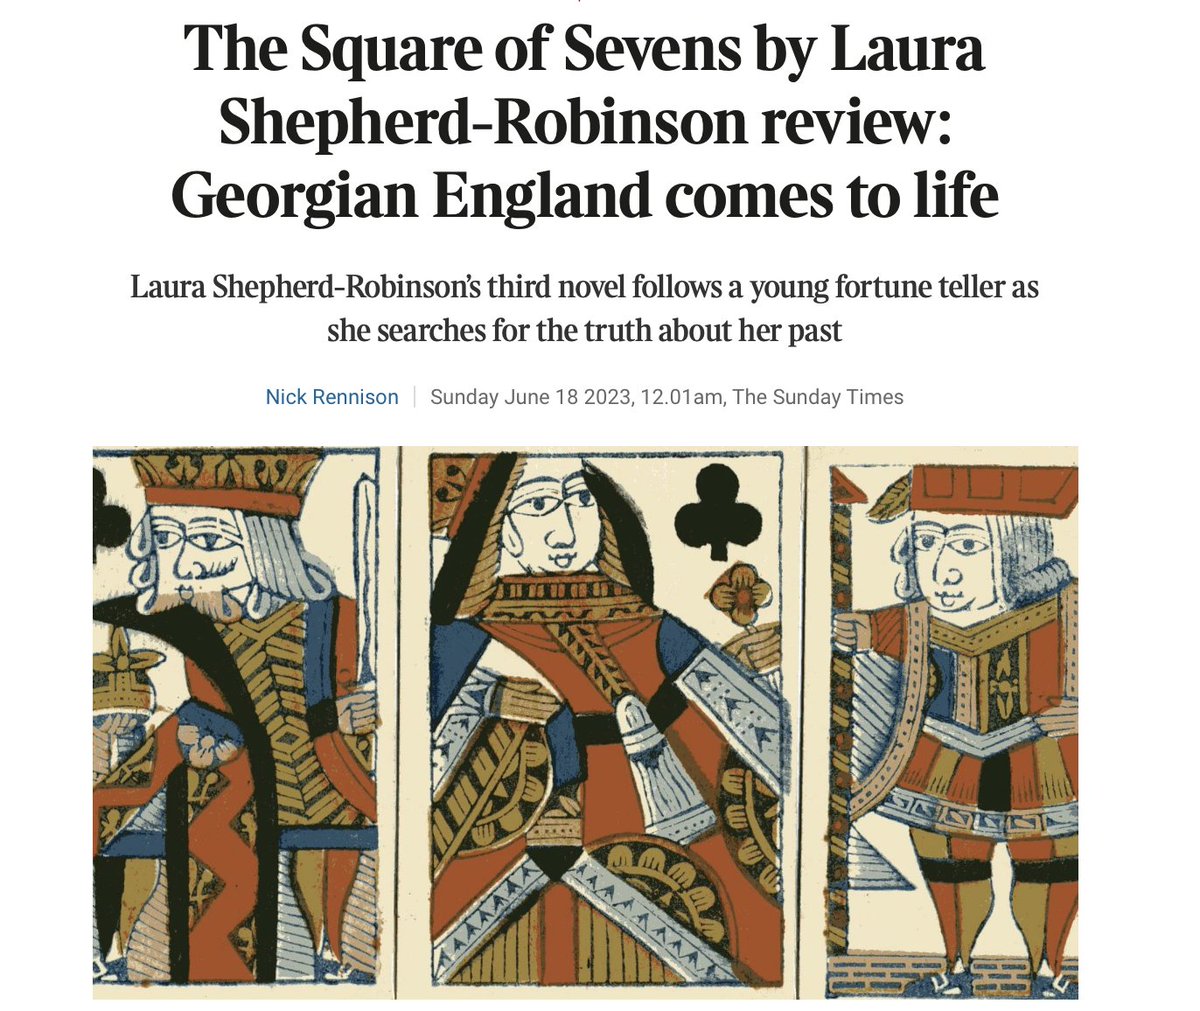 Delighted to see both @essiefox and @NeilBlackmo in Nick Rennison's roundup of the best historical fiction in the Sunday Times, AND a fantastic review for @LauraSRobinson's brilliant Square of Sevens. Some amazing historical fiction being published at the moment.